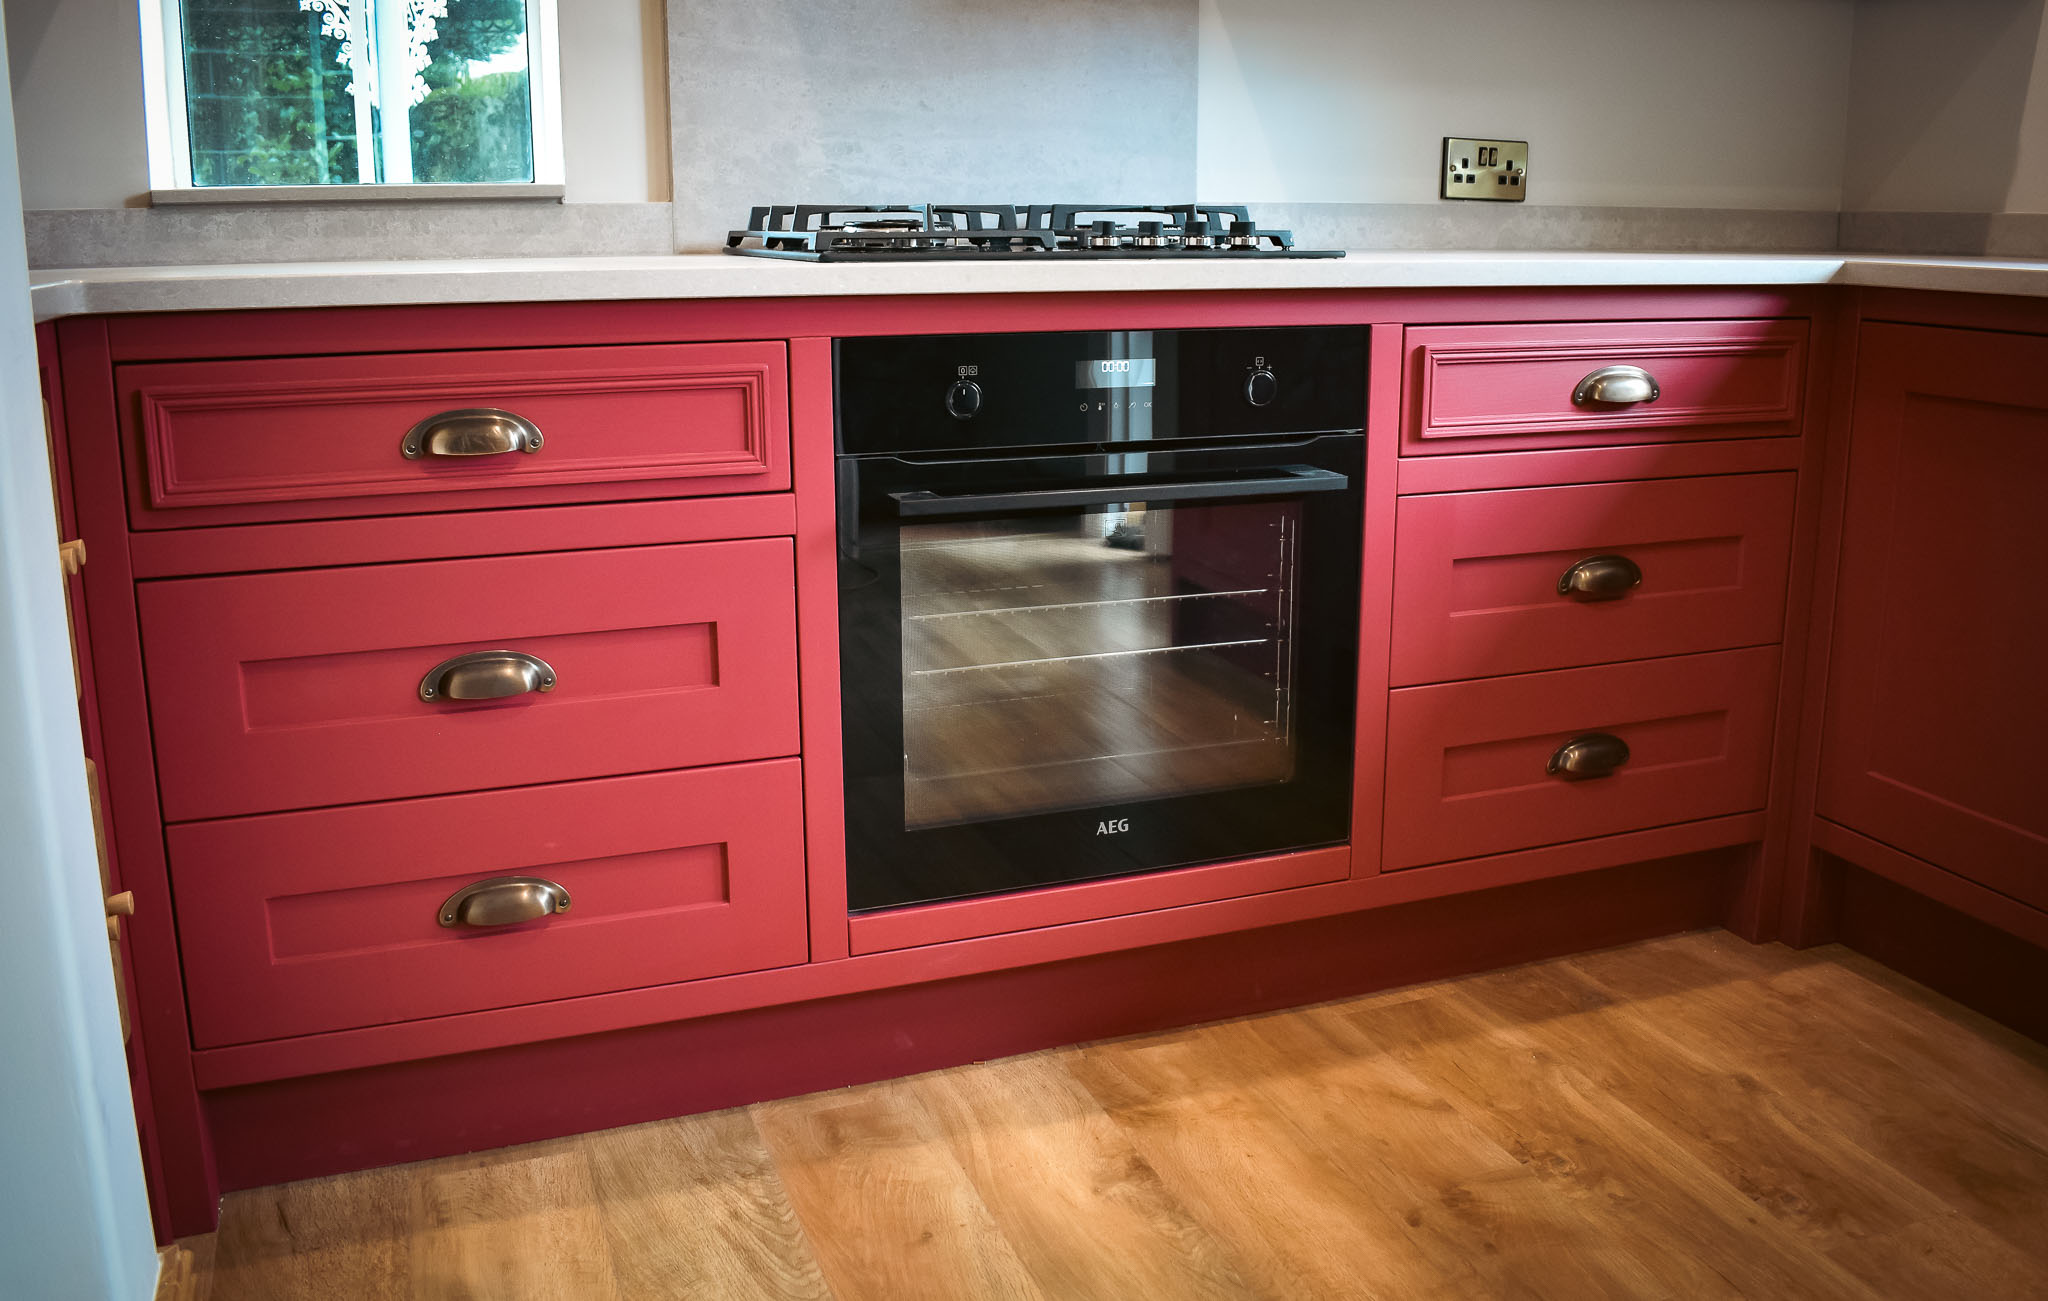 Handmade in frame shaker kitchen handprinted in Farrow and Ball